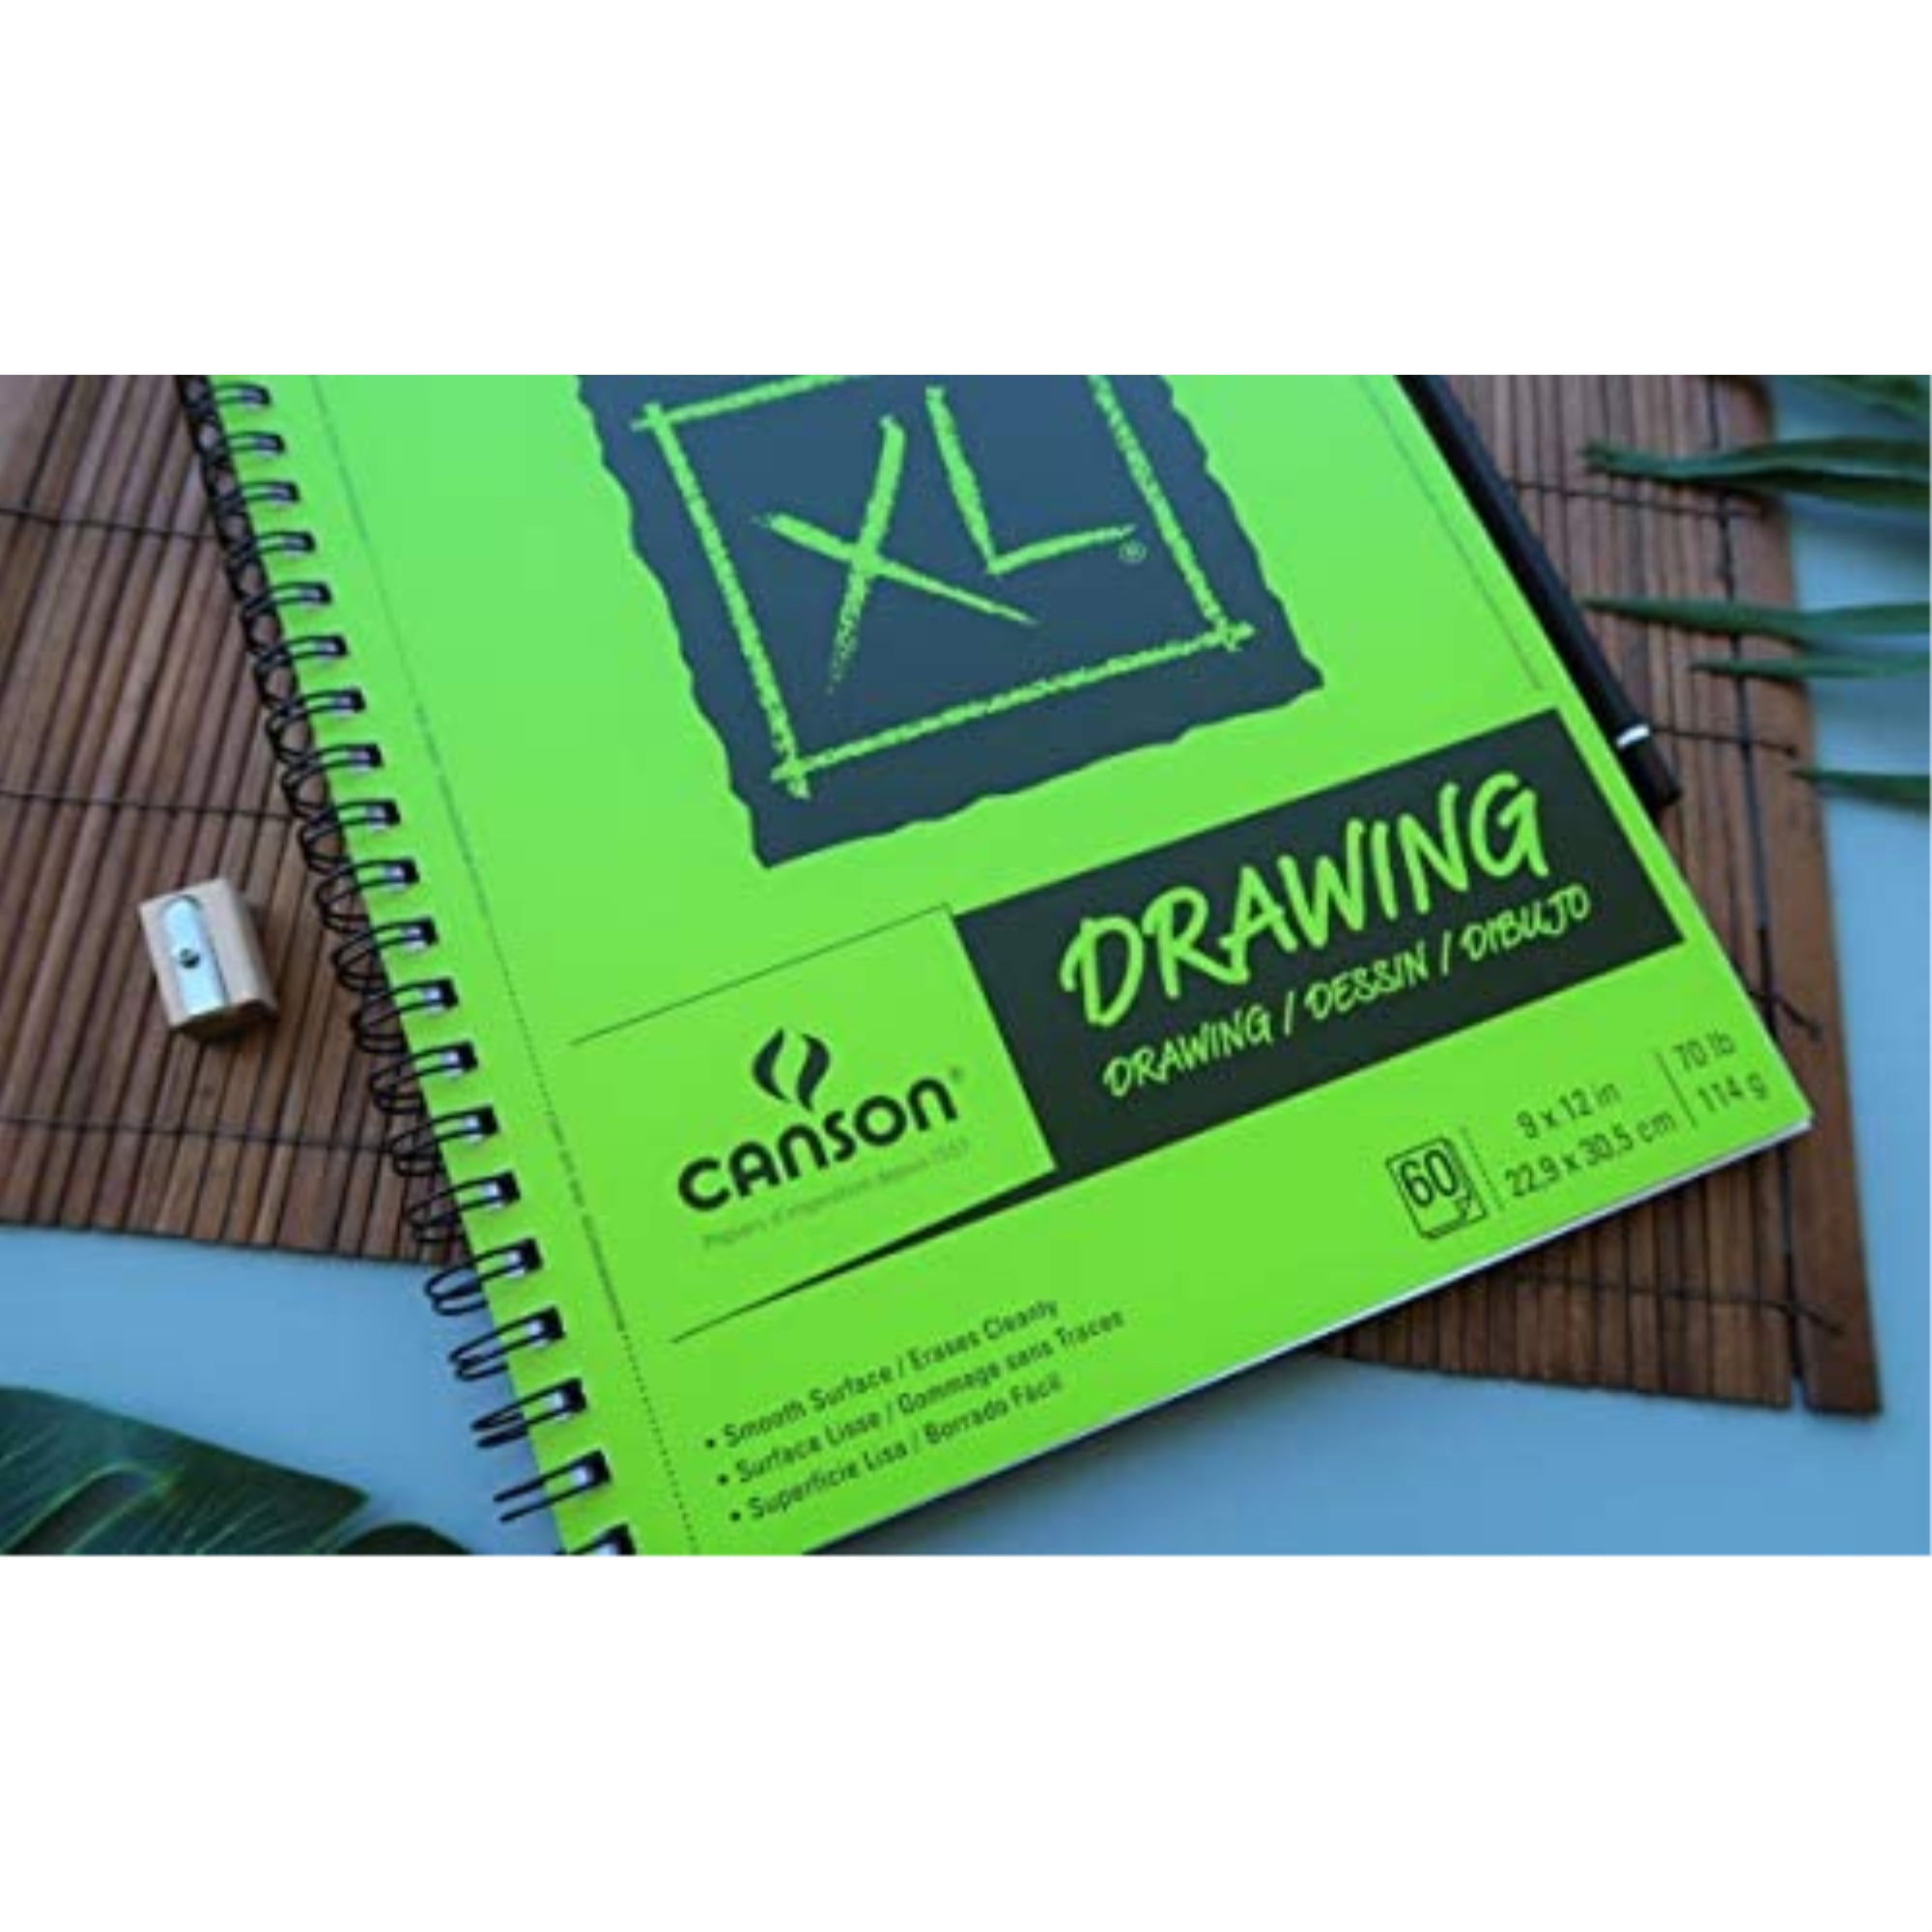 Canson Drawing Paper Pads